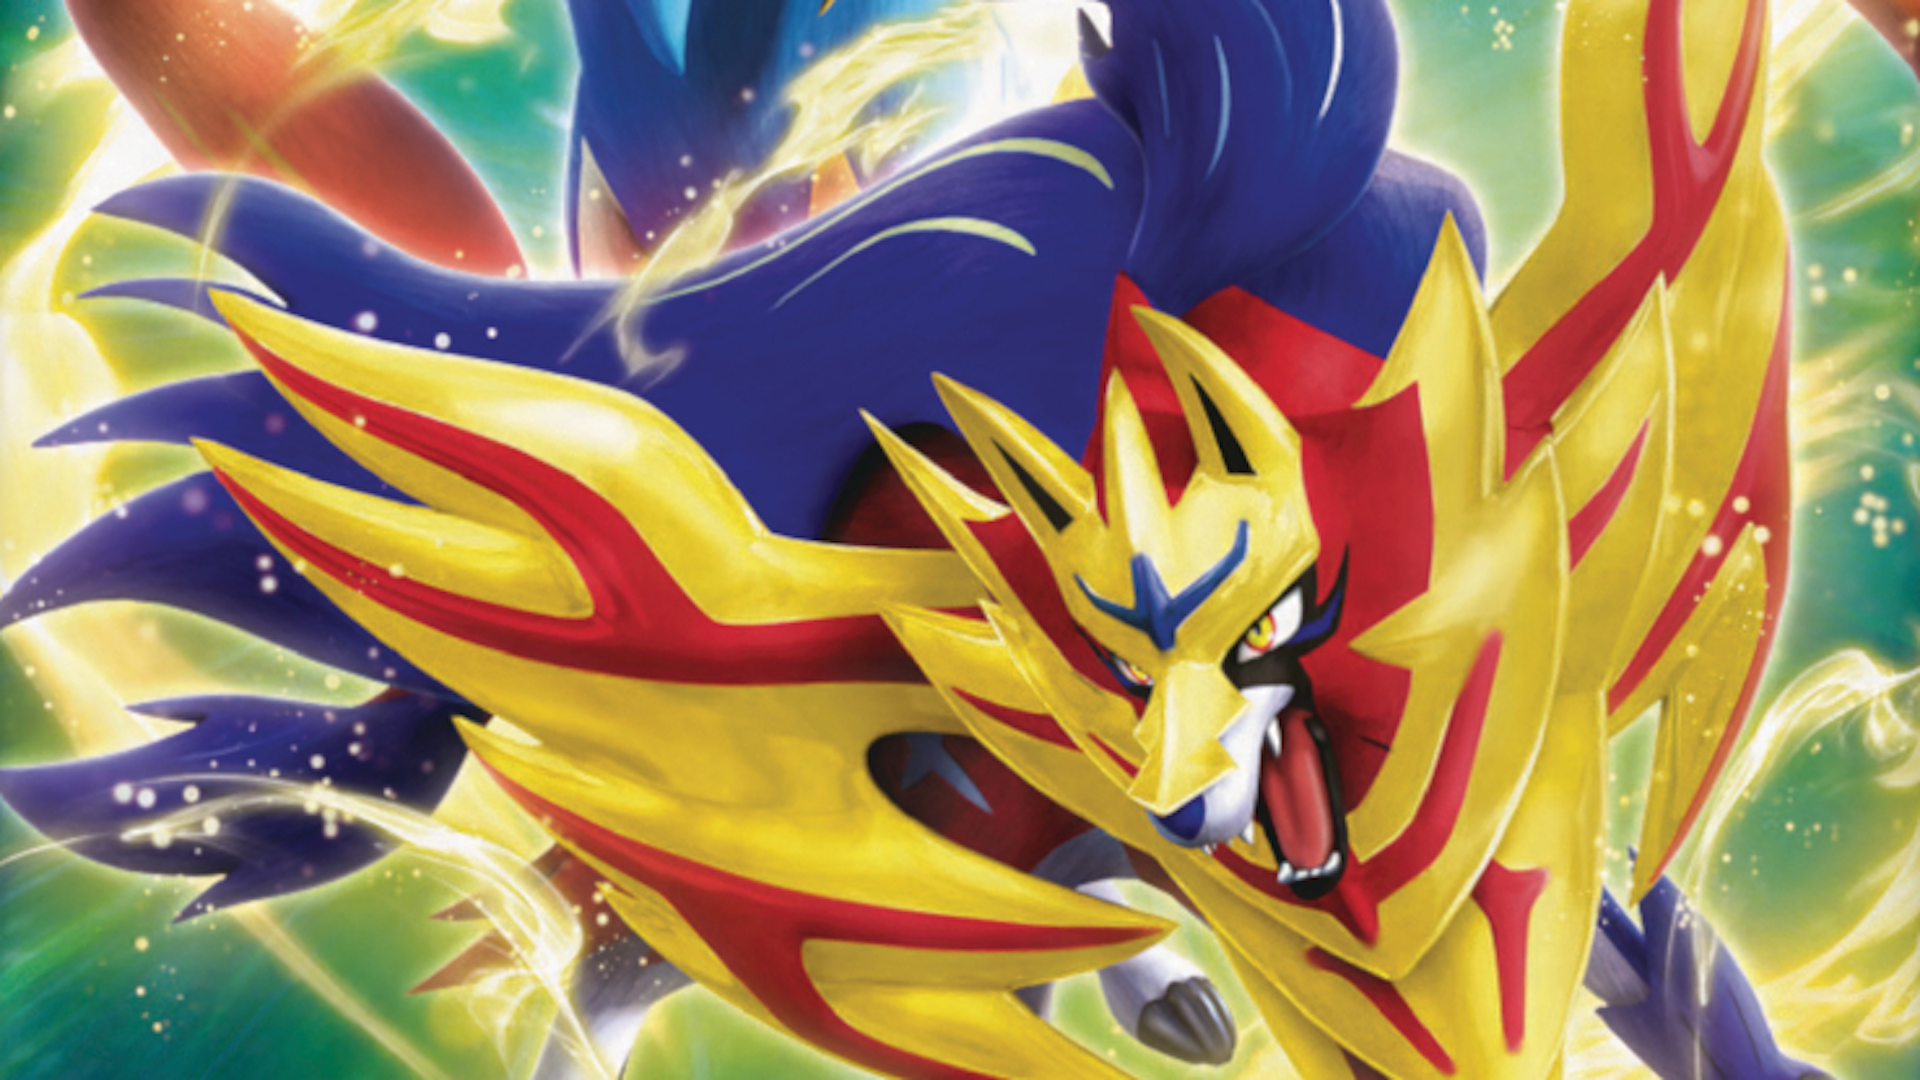 Image for Pokémon TCG’s Crown Zenith expansion will include shiny Charizard and alternate art Galarian Gallery